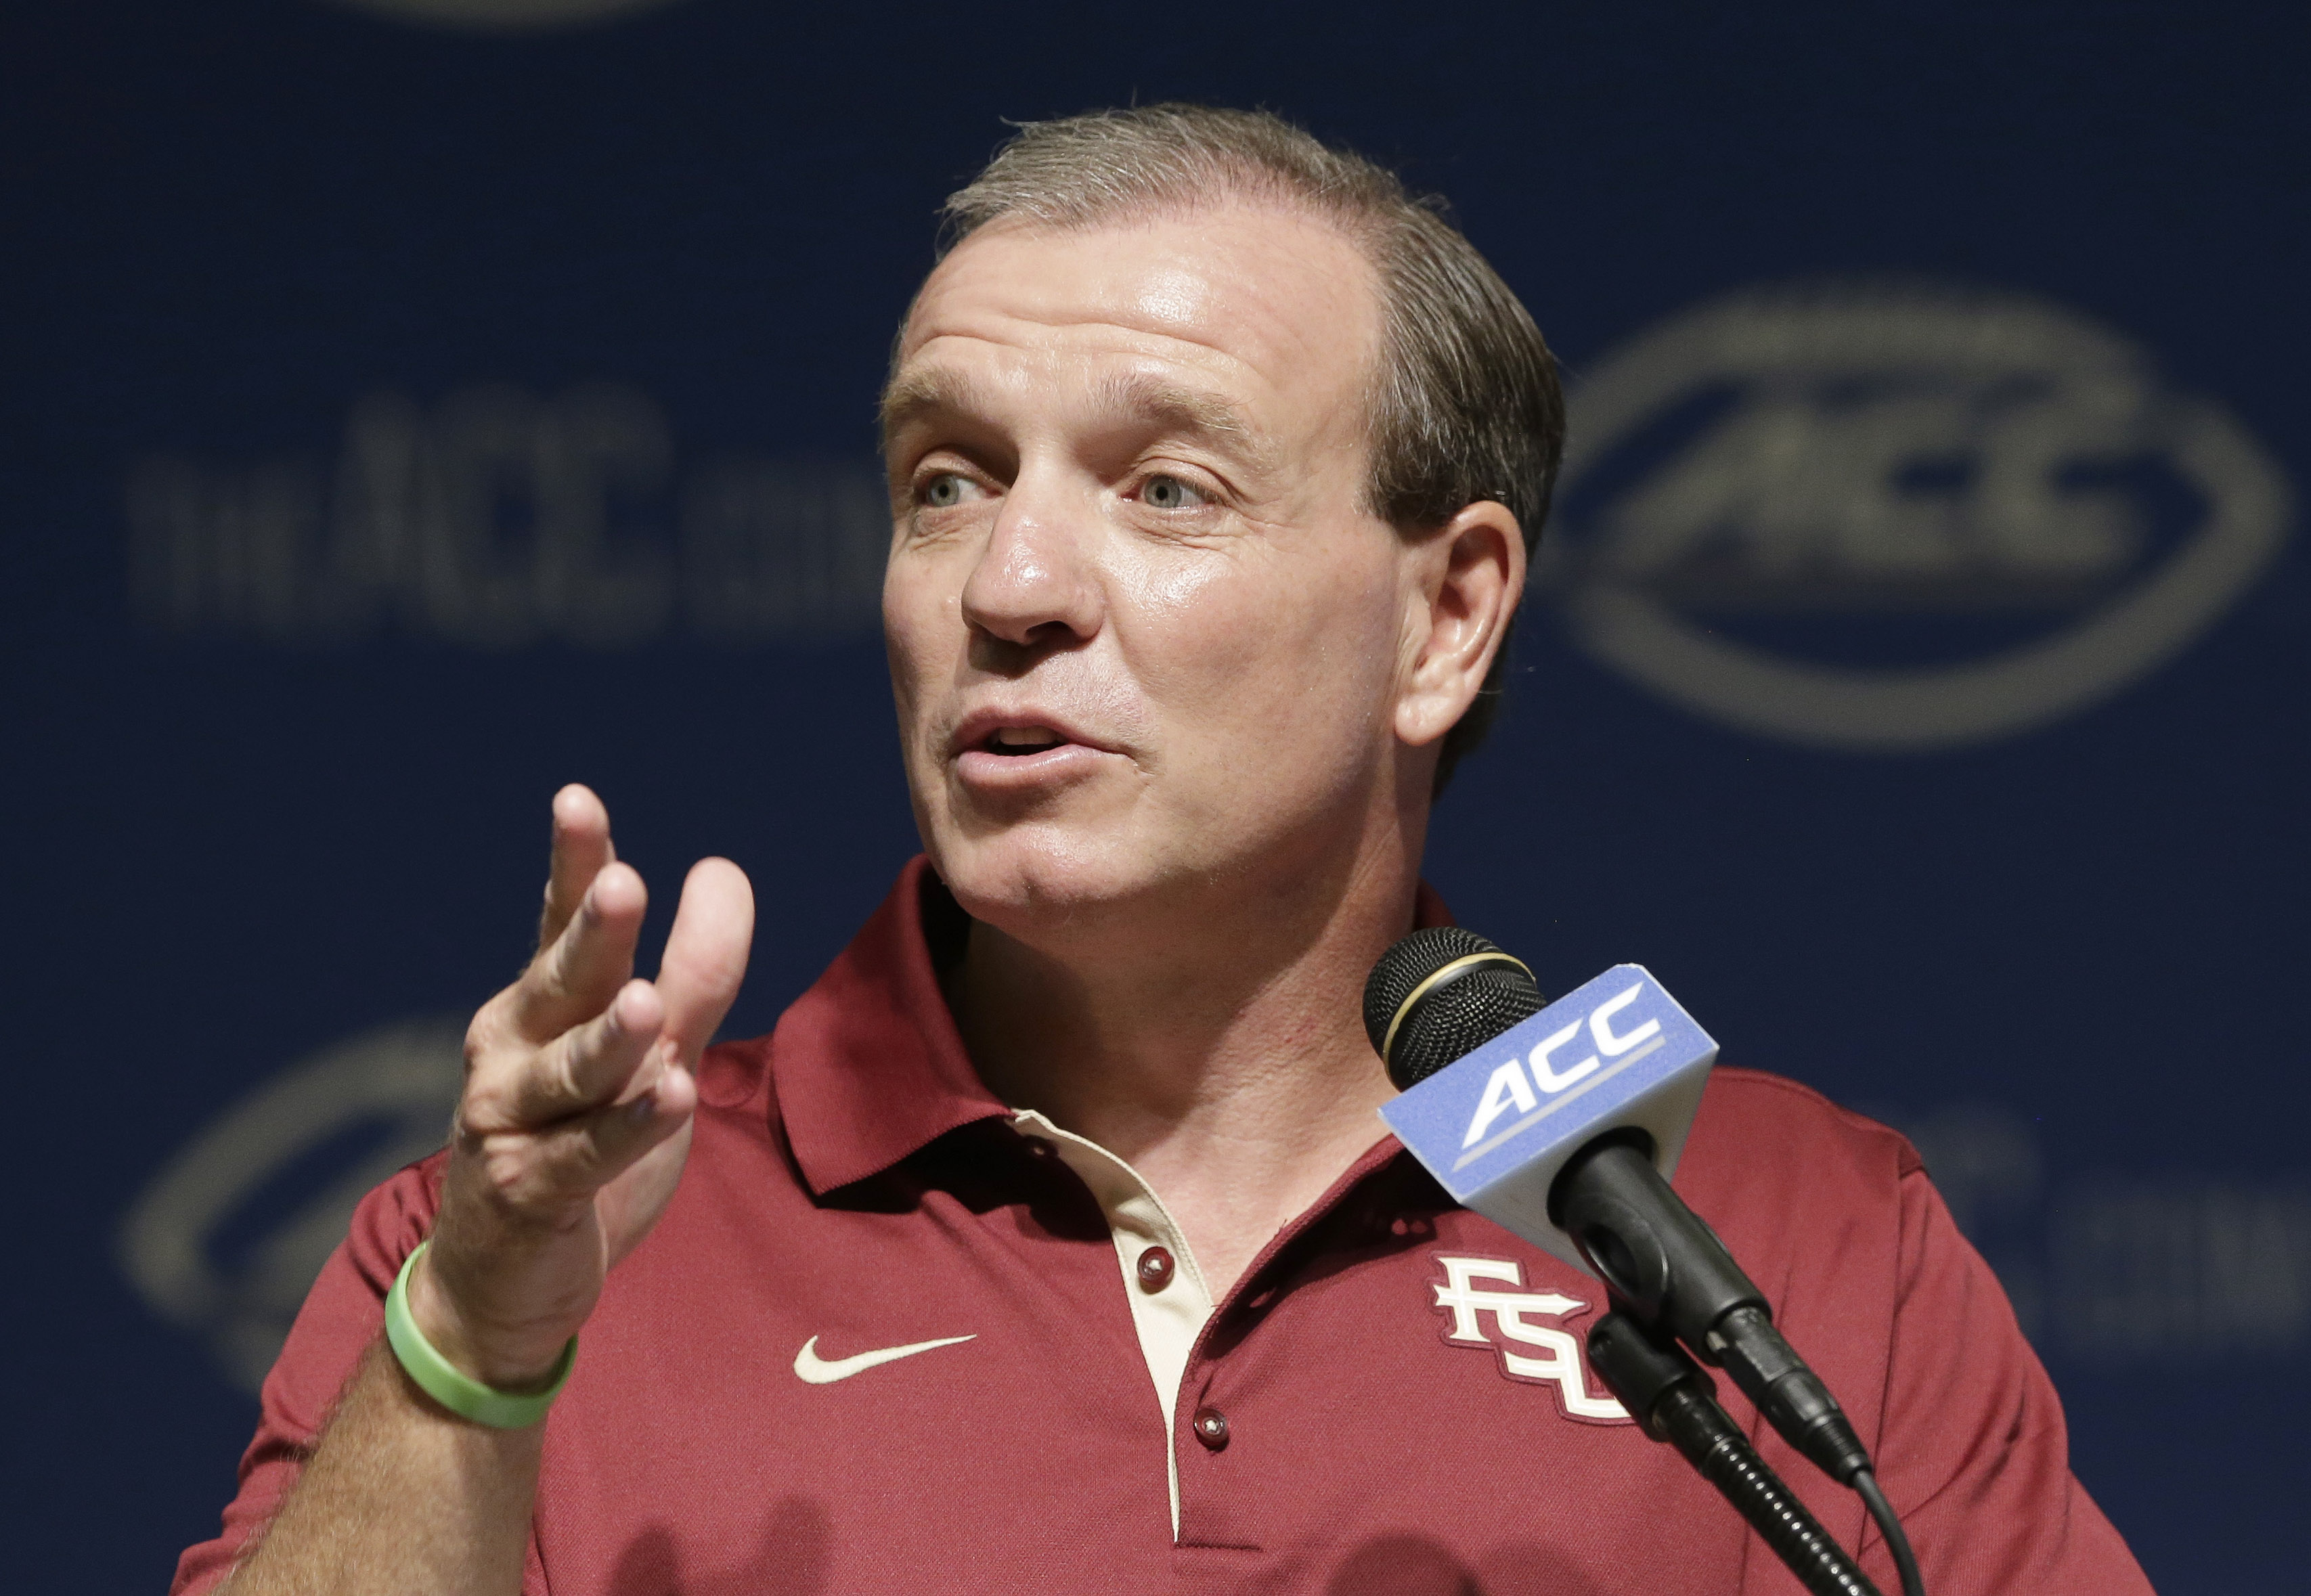 Florida State coach Jimbo Fisher responds to questions during the ACC NCAA college football kickoff in Pinehurst, N.C., Tuesday, July 21, 2015. (AP Photo/Gerry Broome)